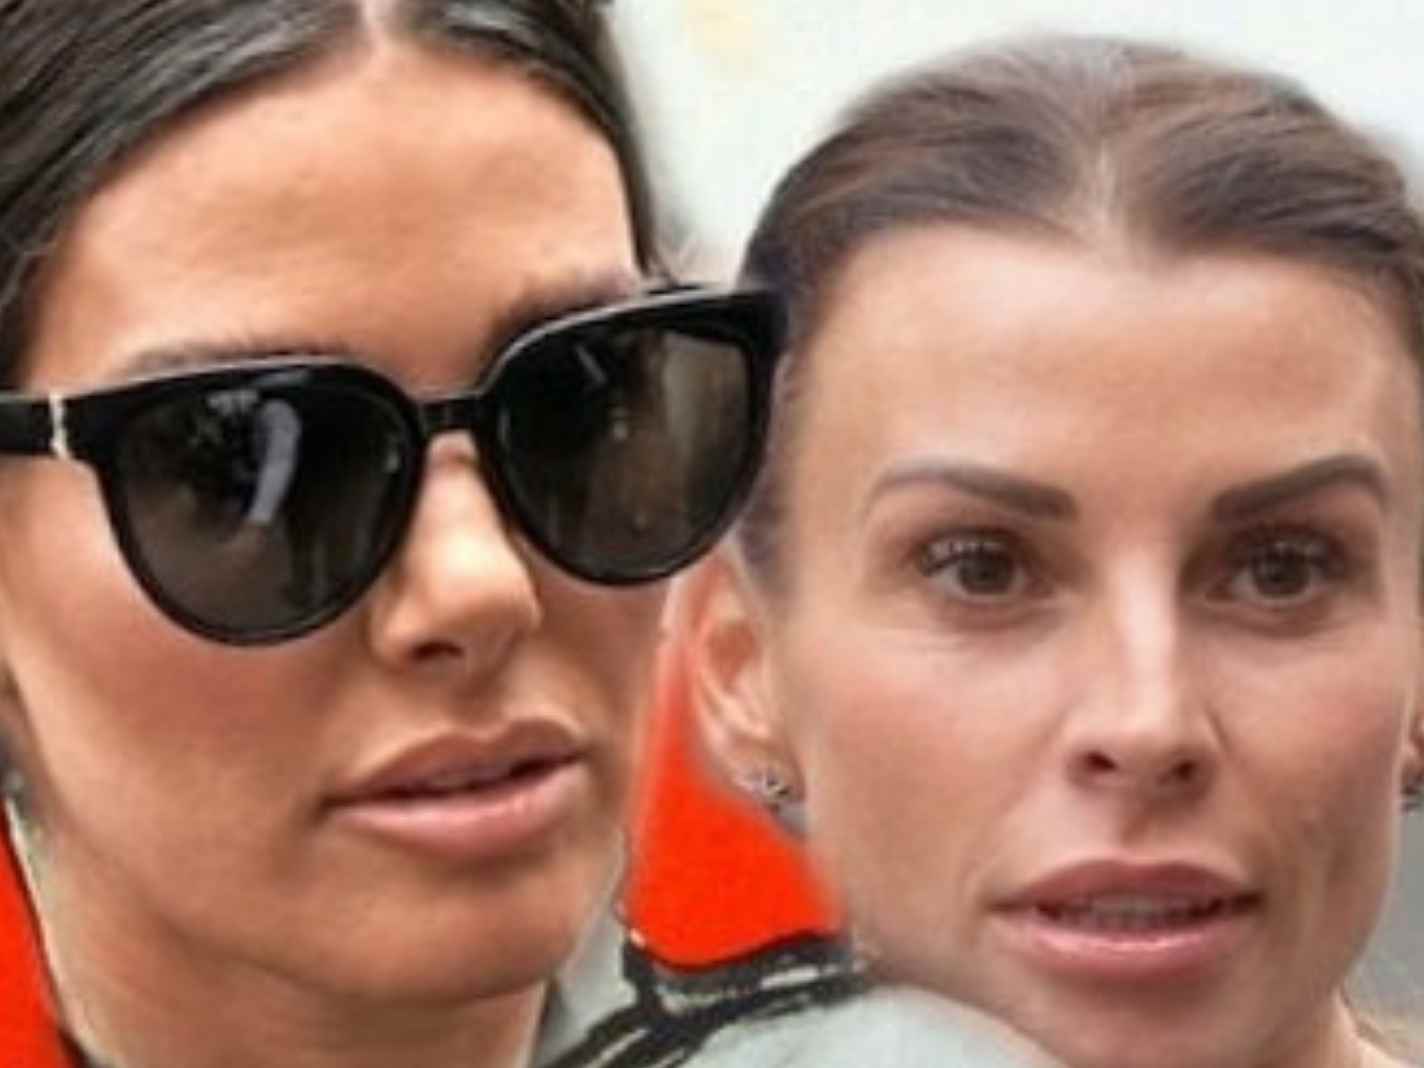 In this image - Faces of Rebekah Vardy and Coleen Rooney